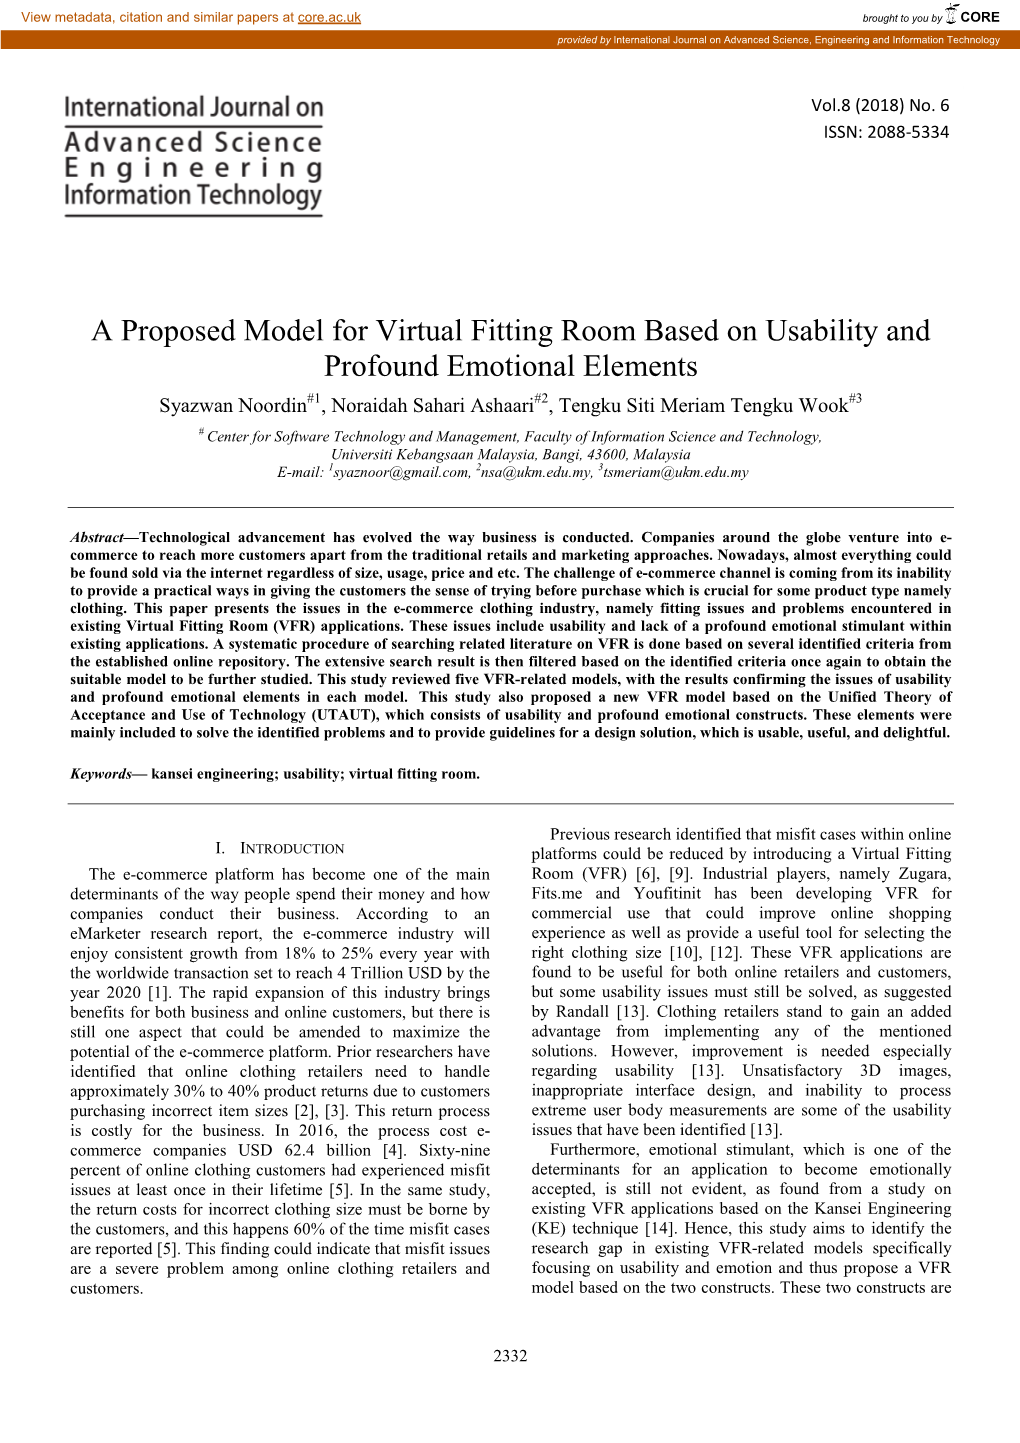 A Proposed Model for Virtual Fitting Room Based on Usability And